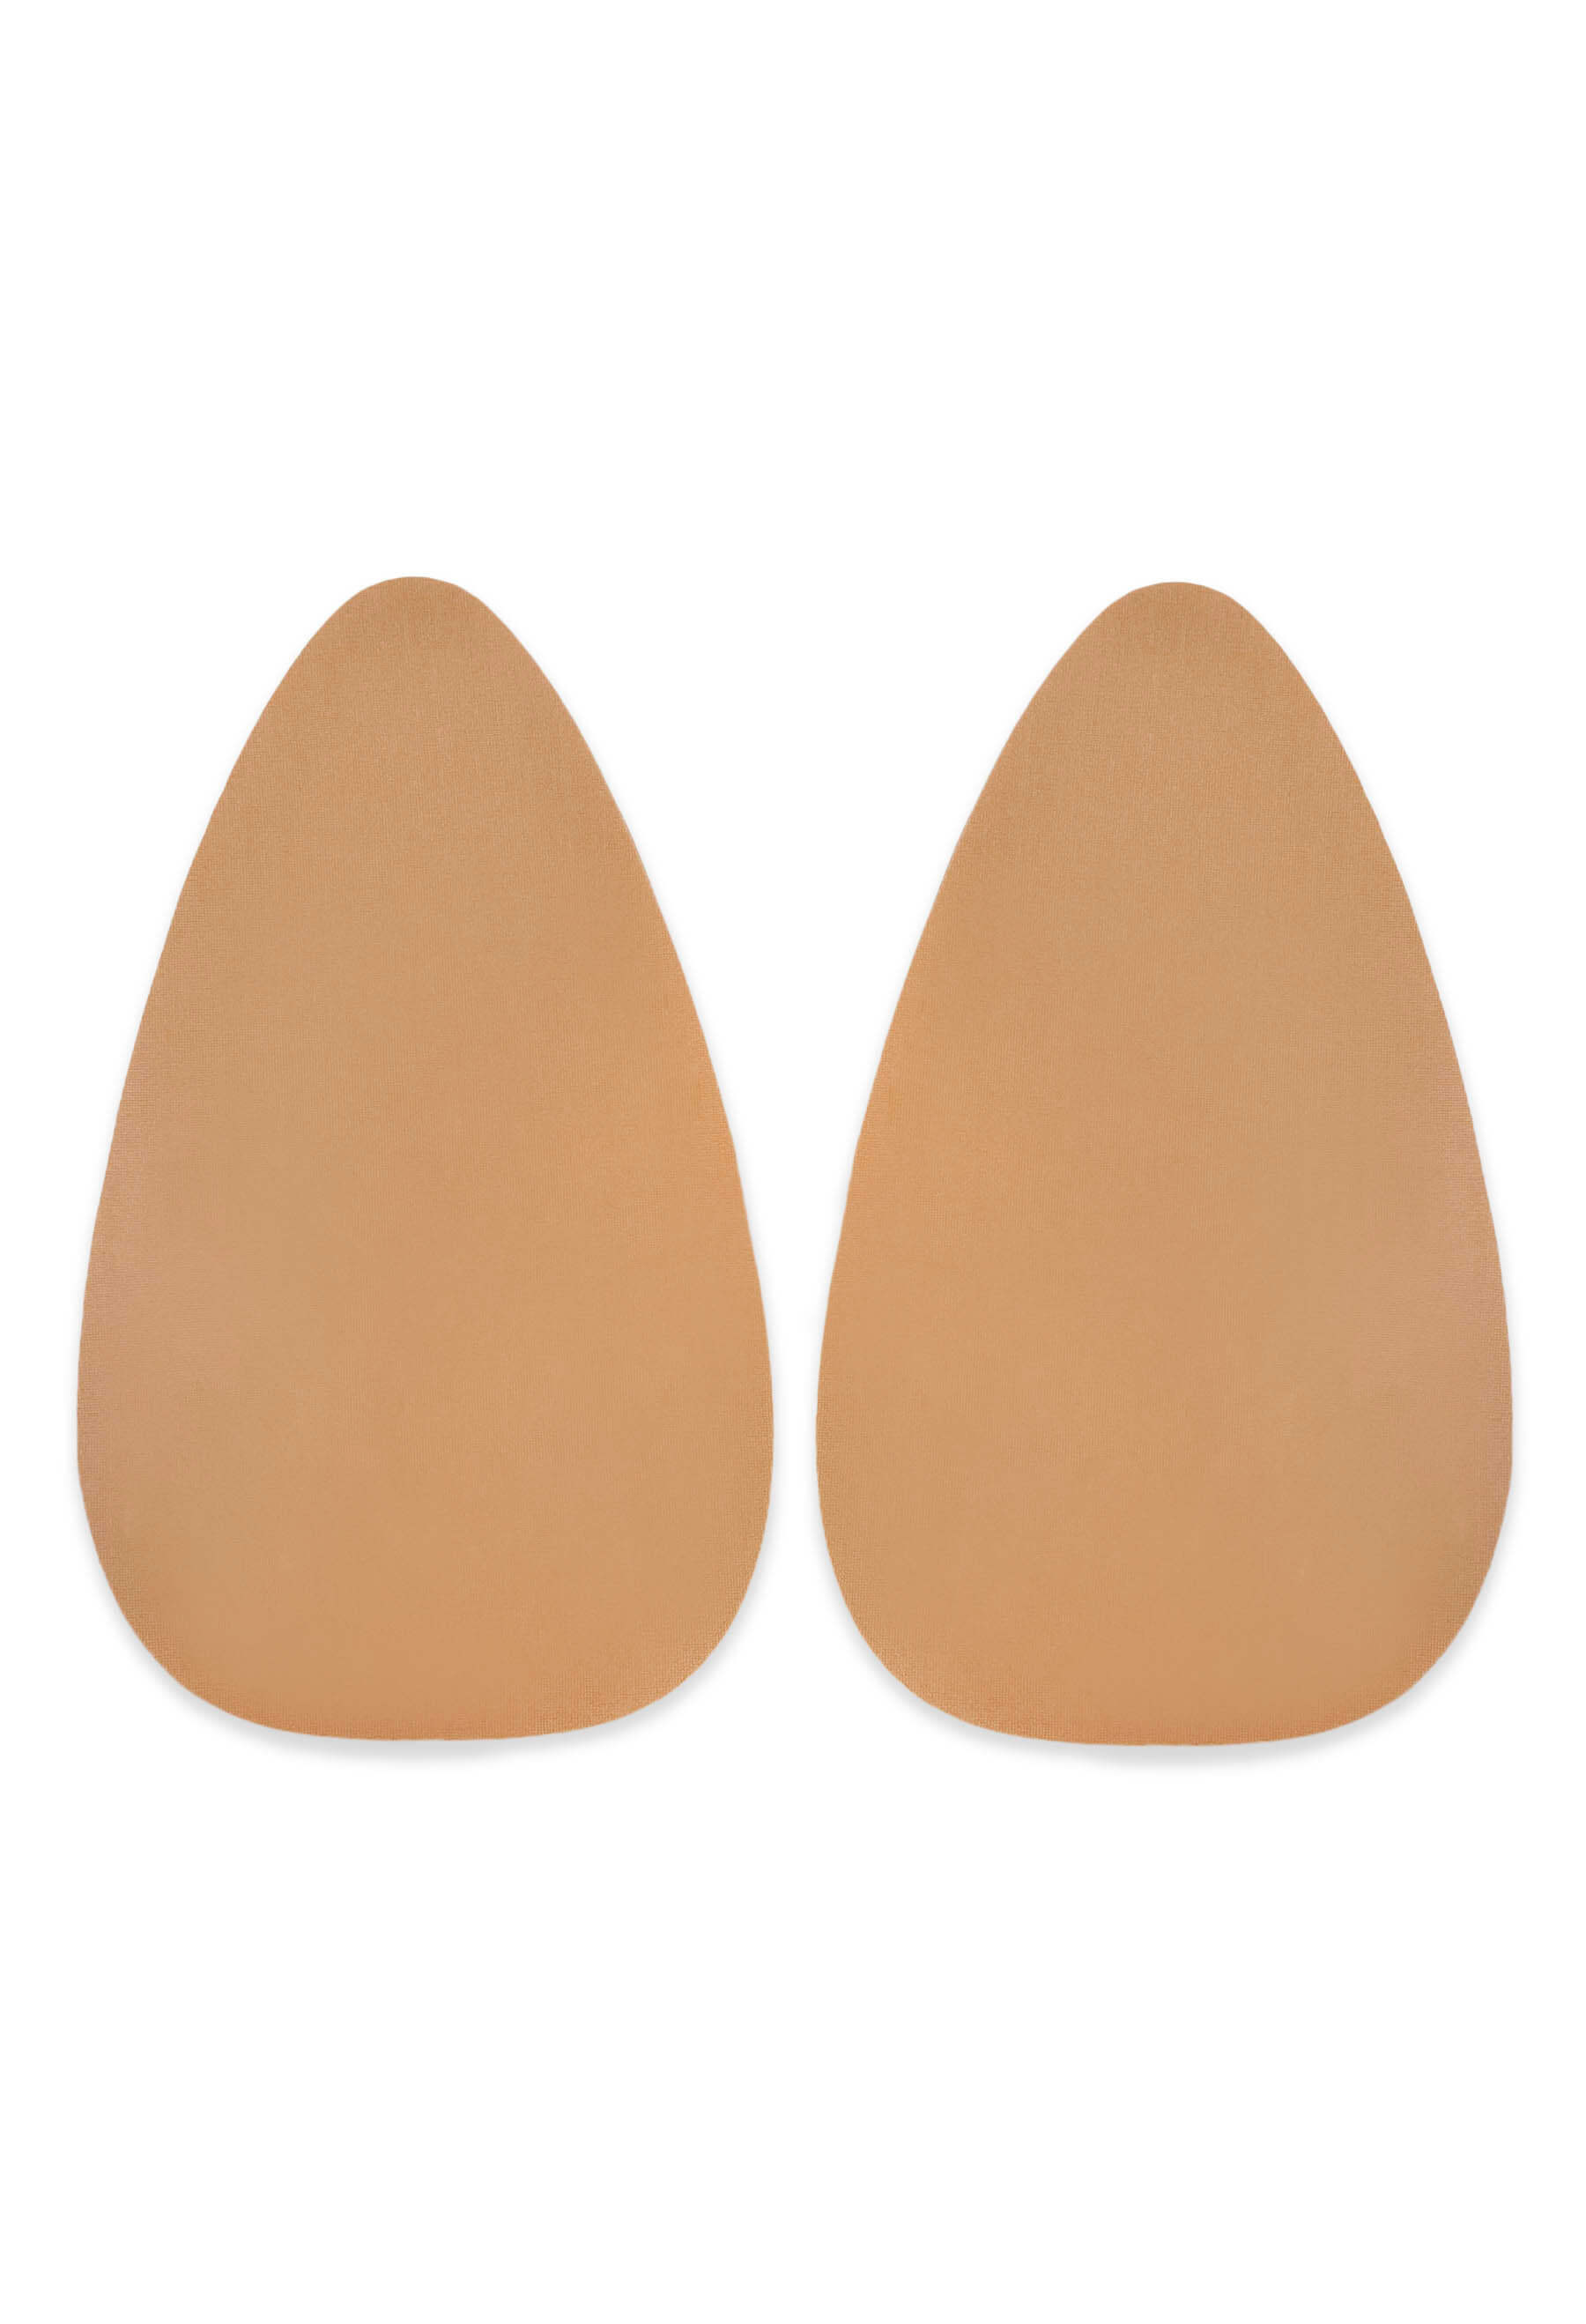 Tear Drop Lift Up Breast & Body Tapes - 1 Pair